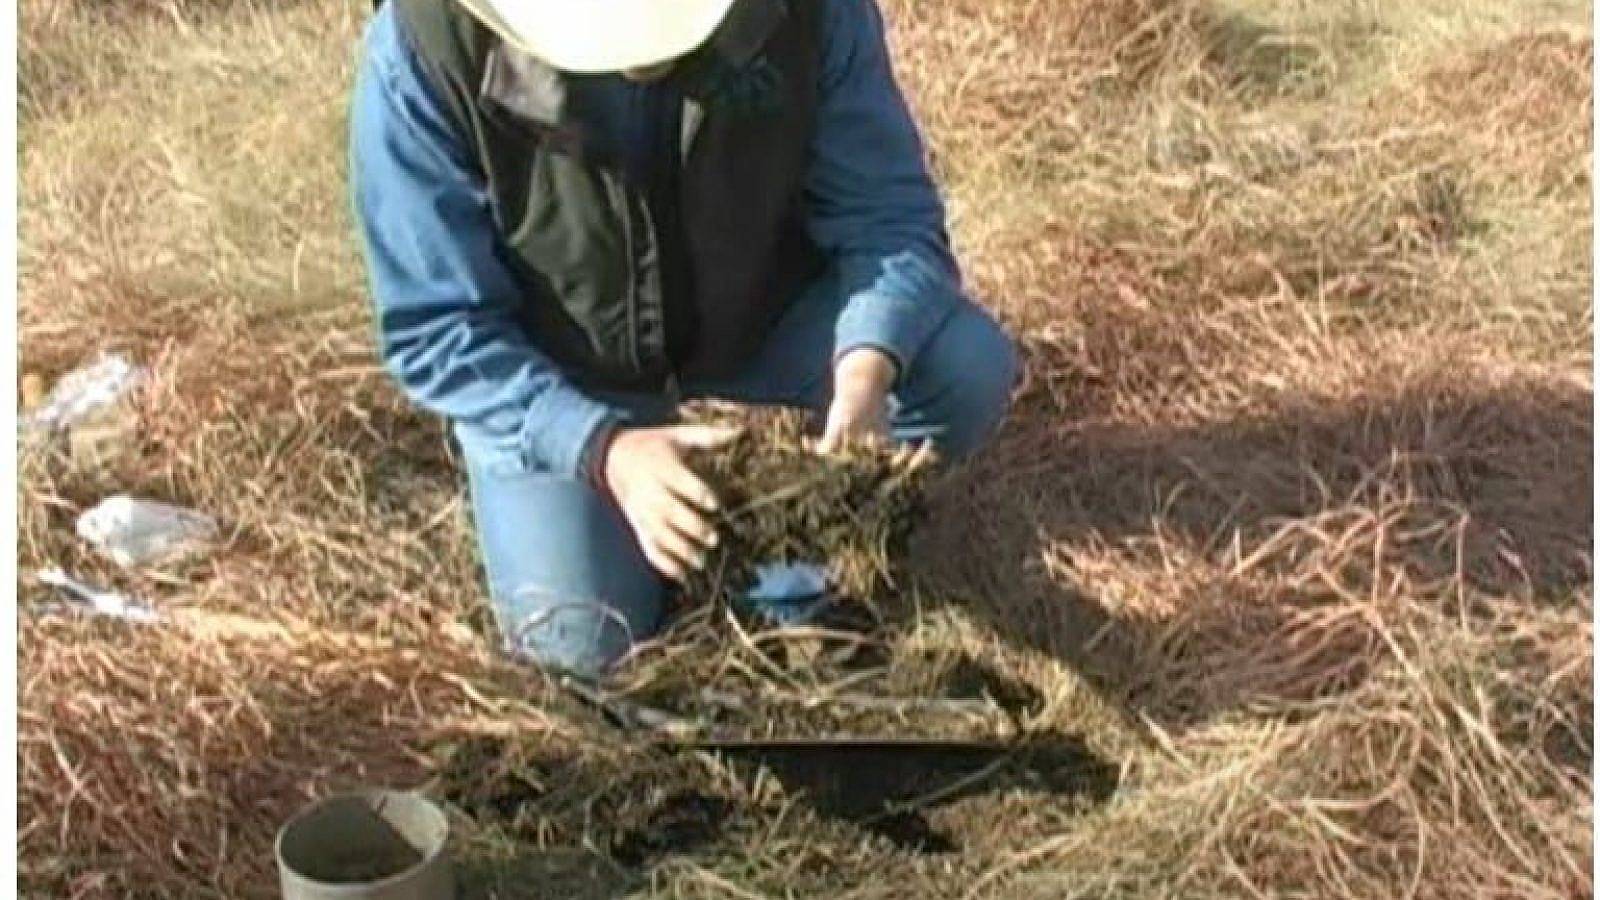 A rancher tests for soil health.